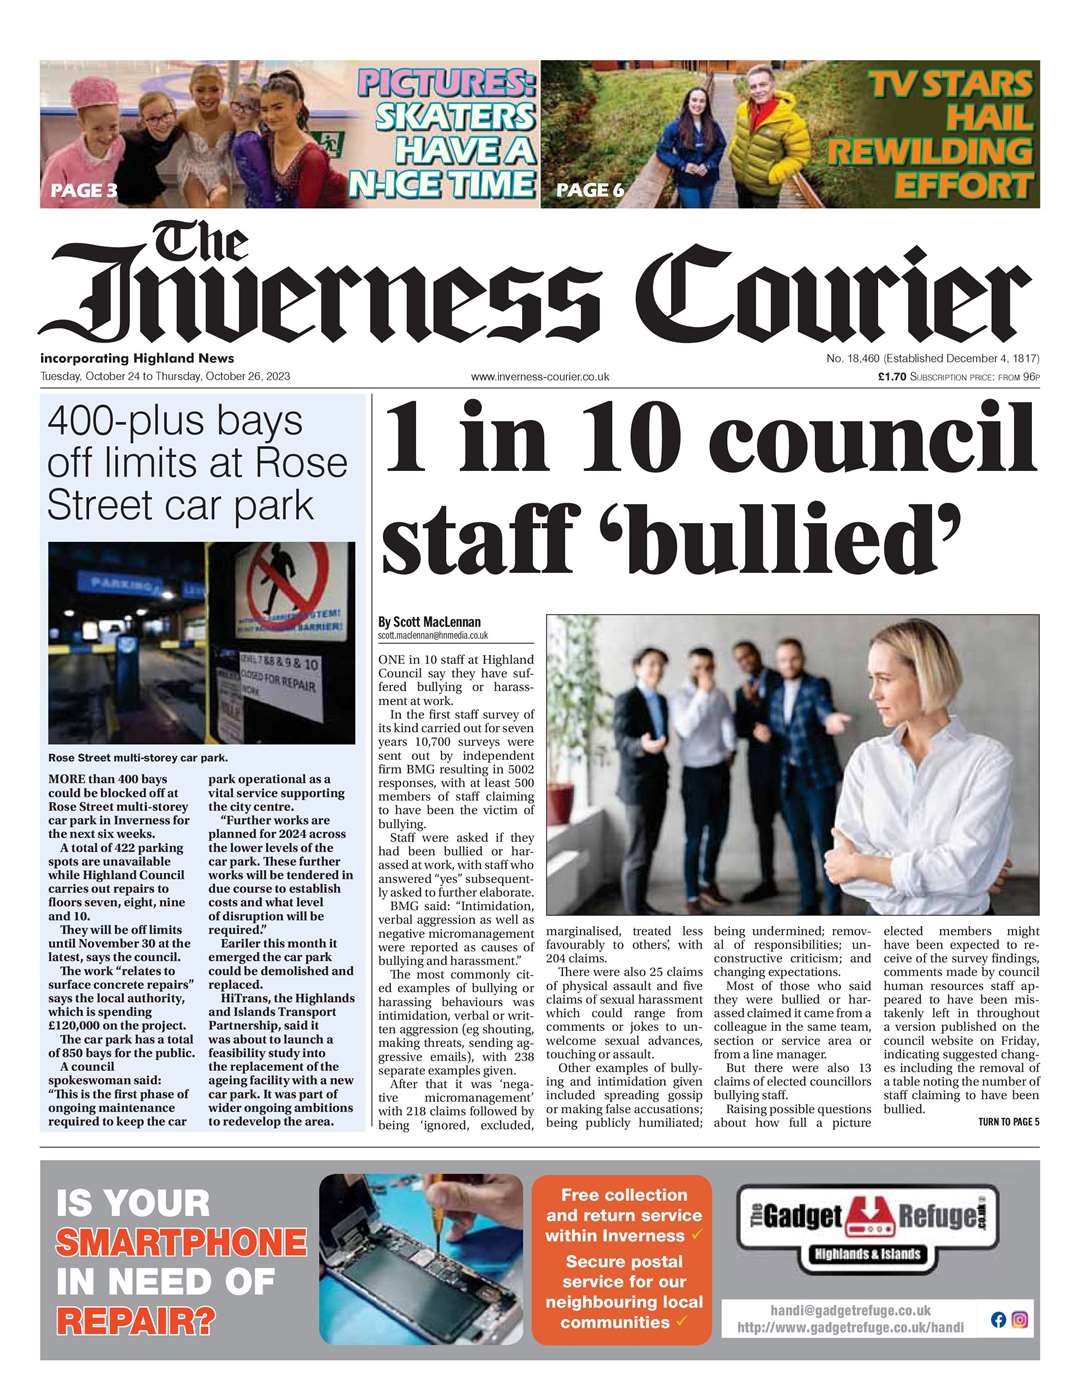 The Inverness Courier, October 24, front page.